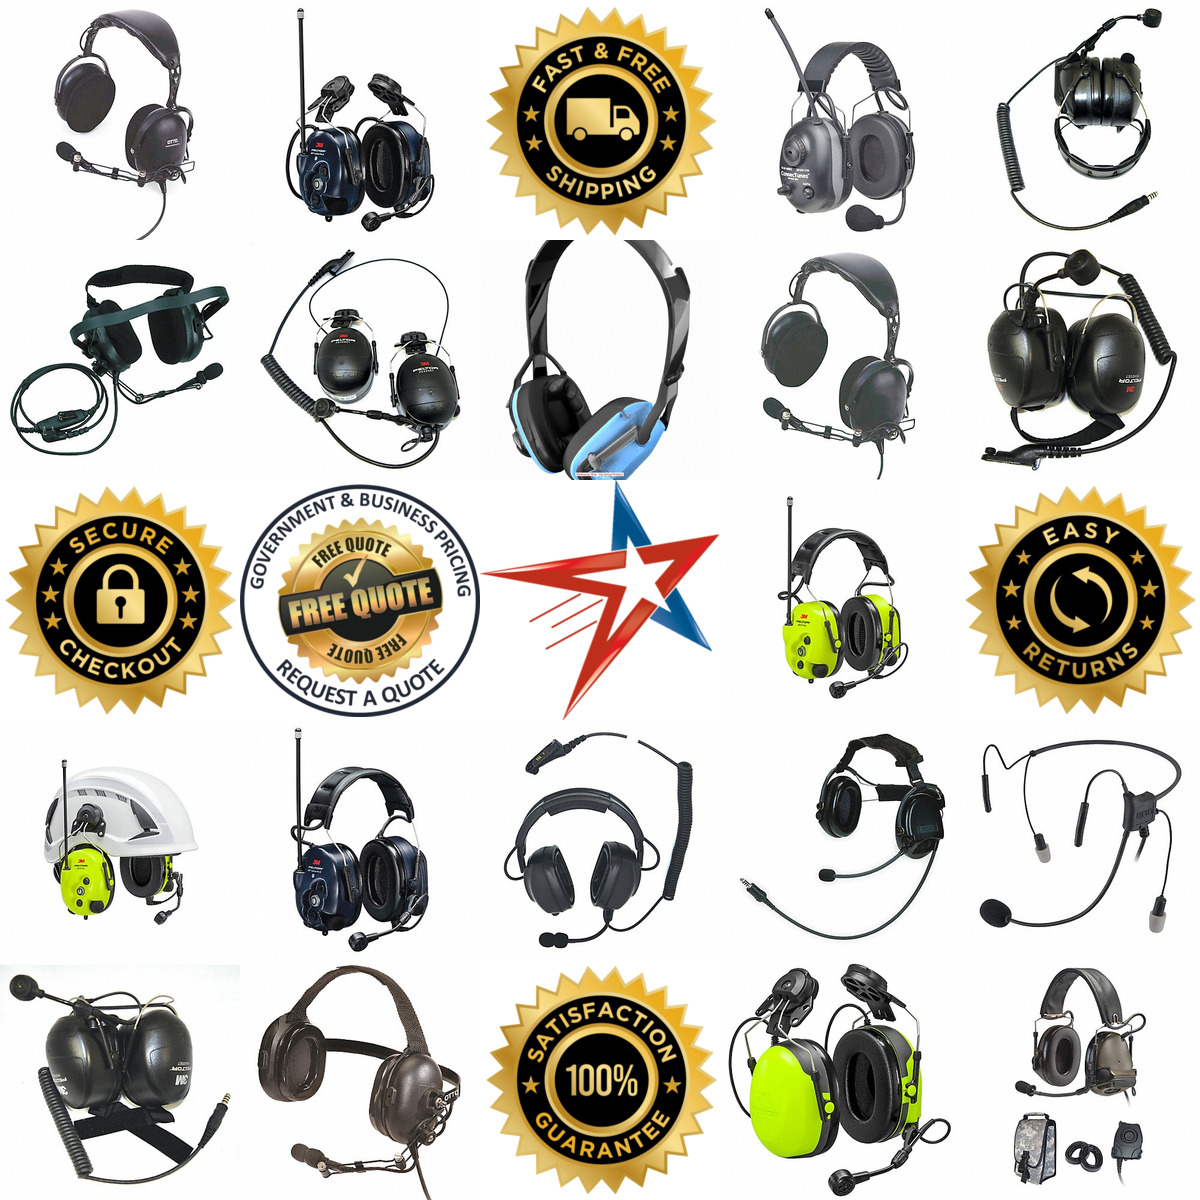 A selection of Noise Reducing Communication Headsets products on GoVets